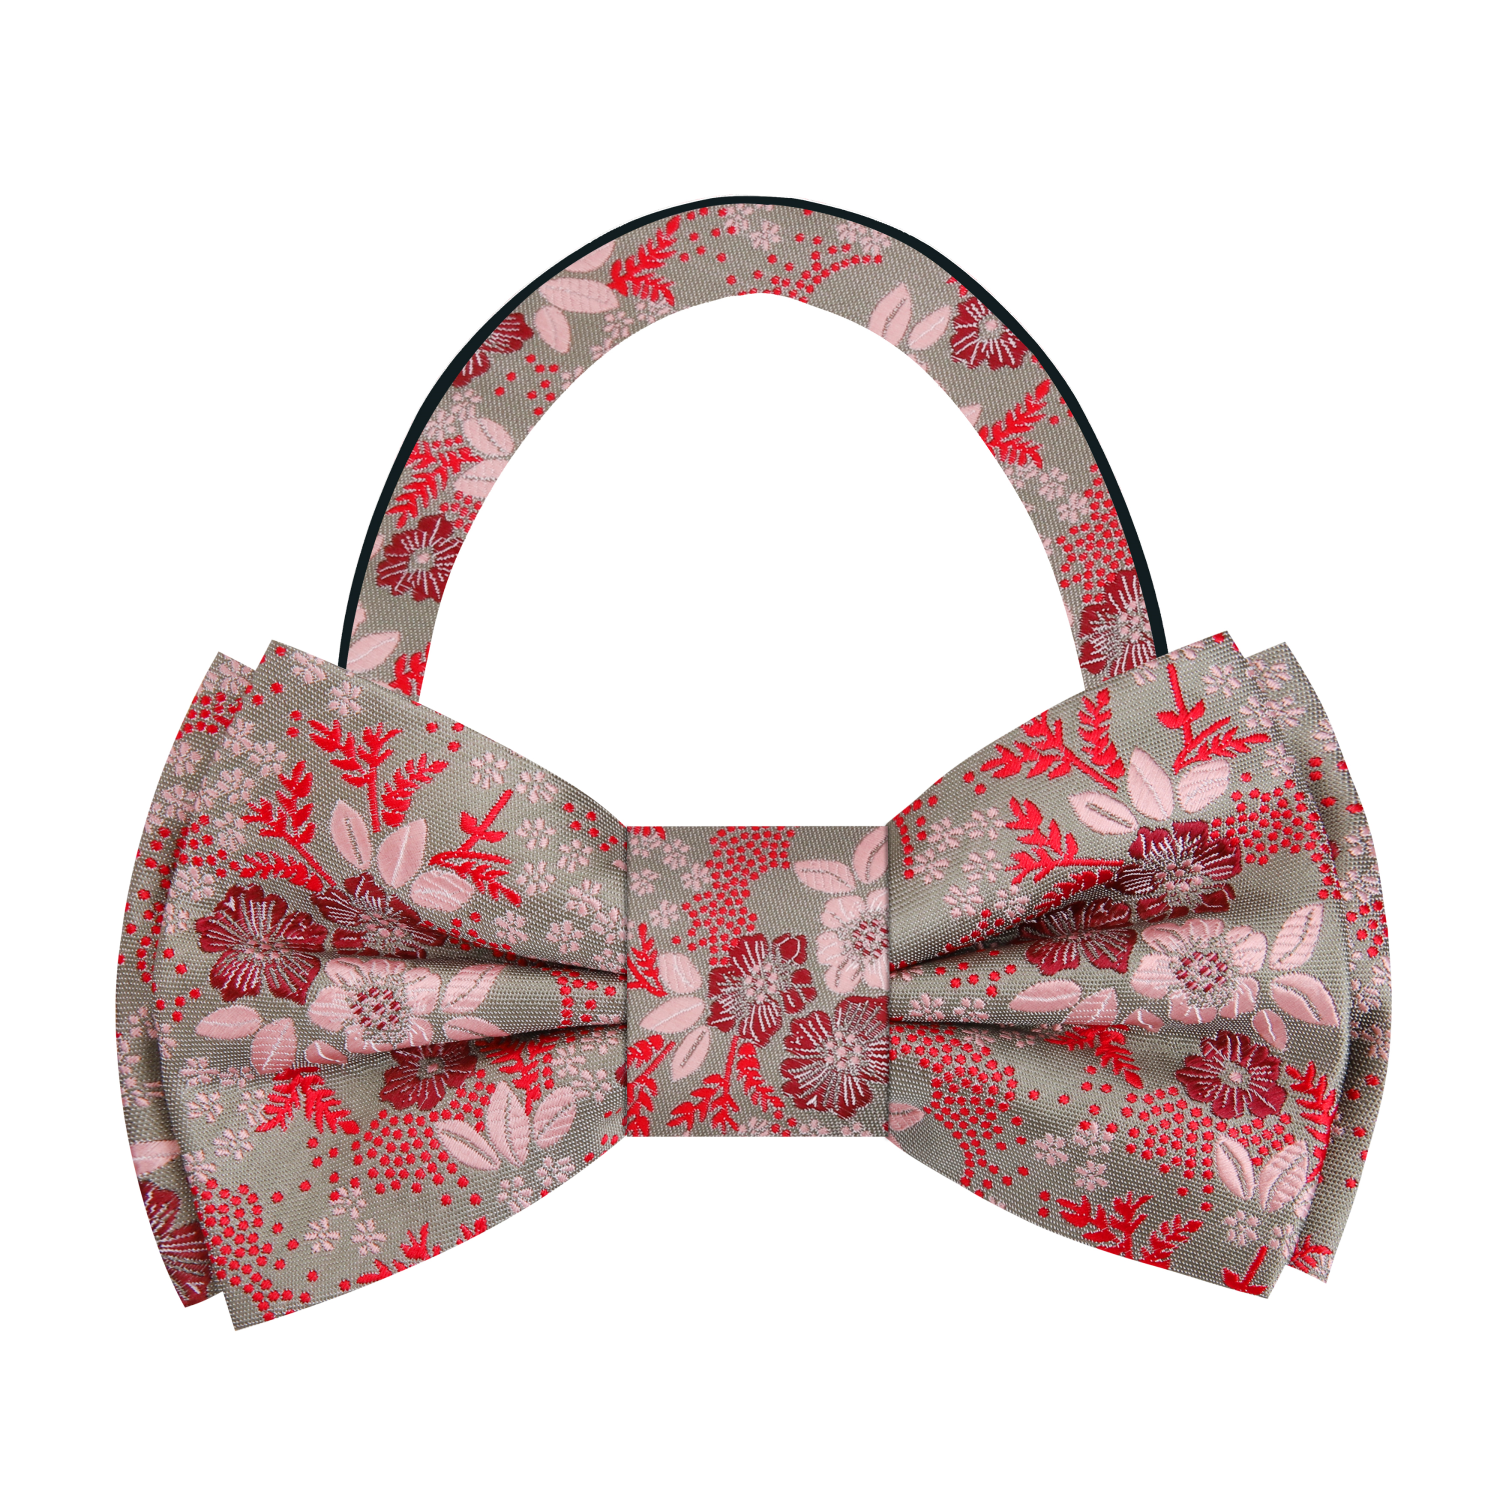 Fresh Original Floral Bow Tie and Pocket Square